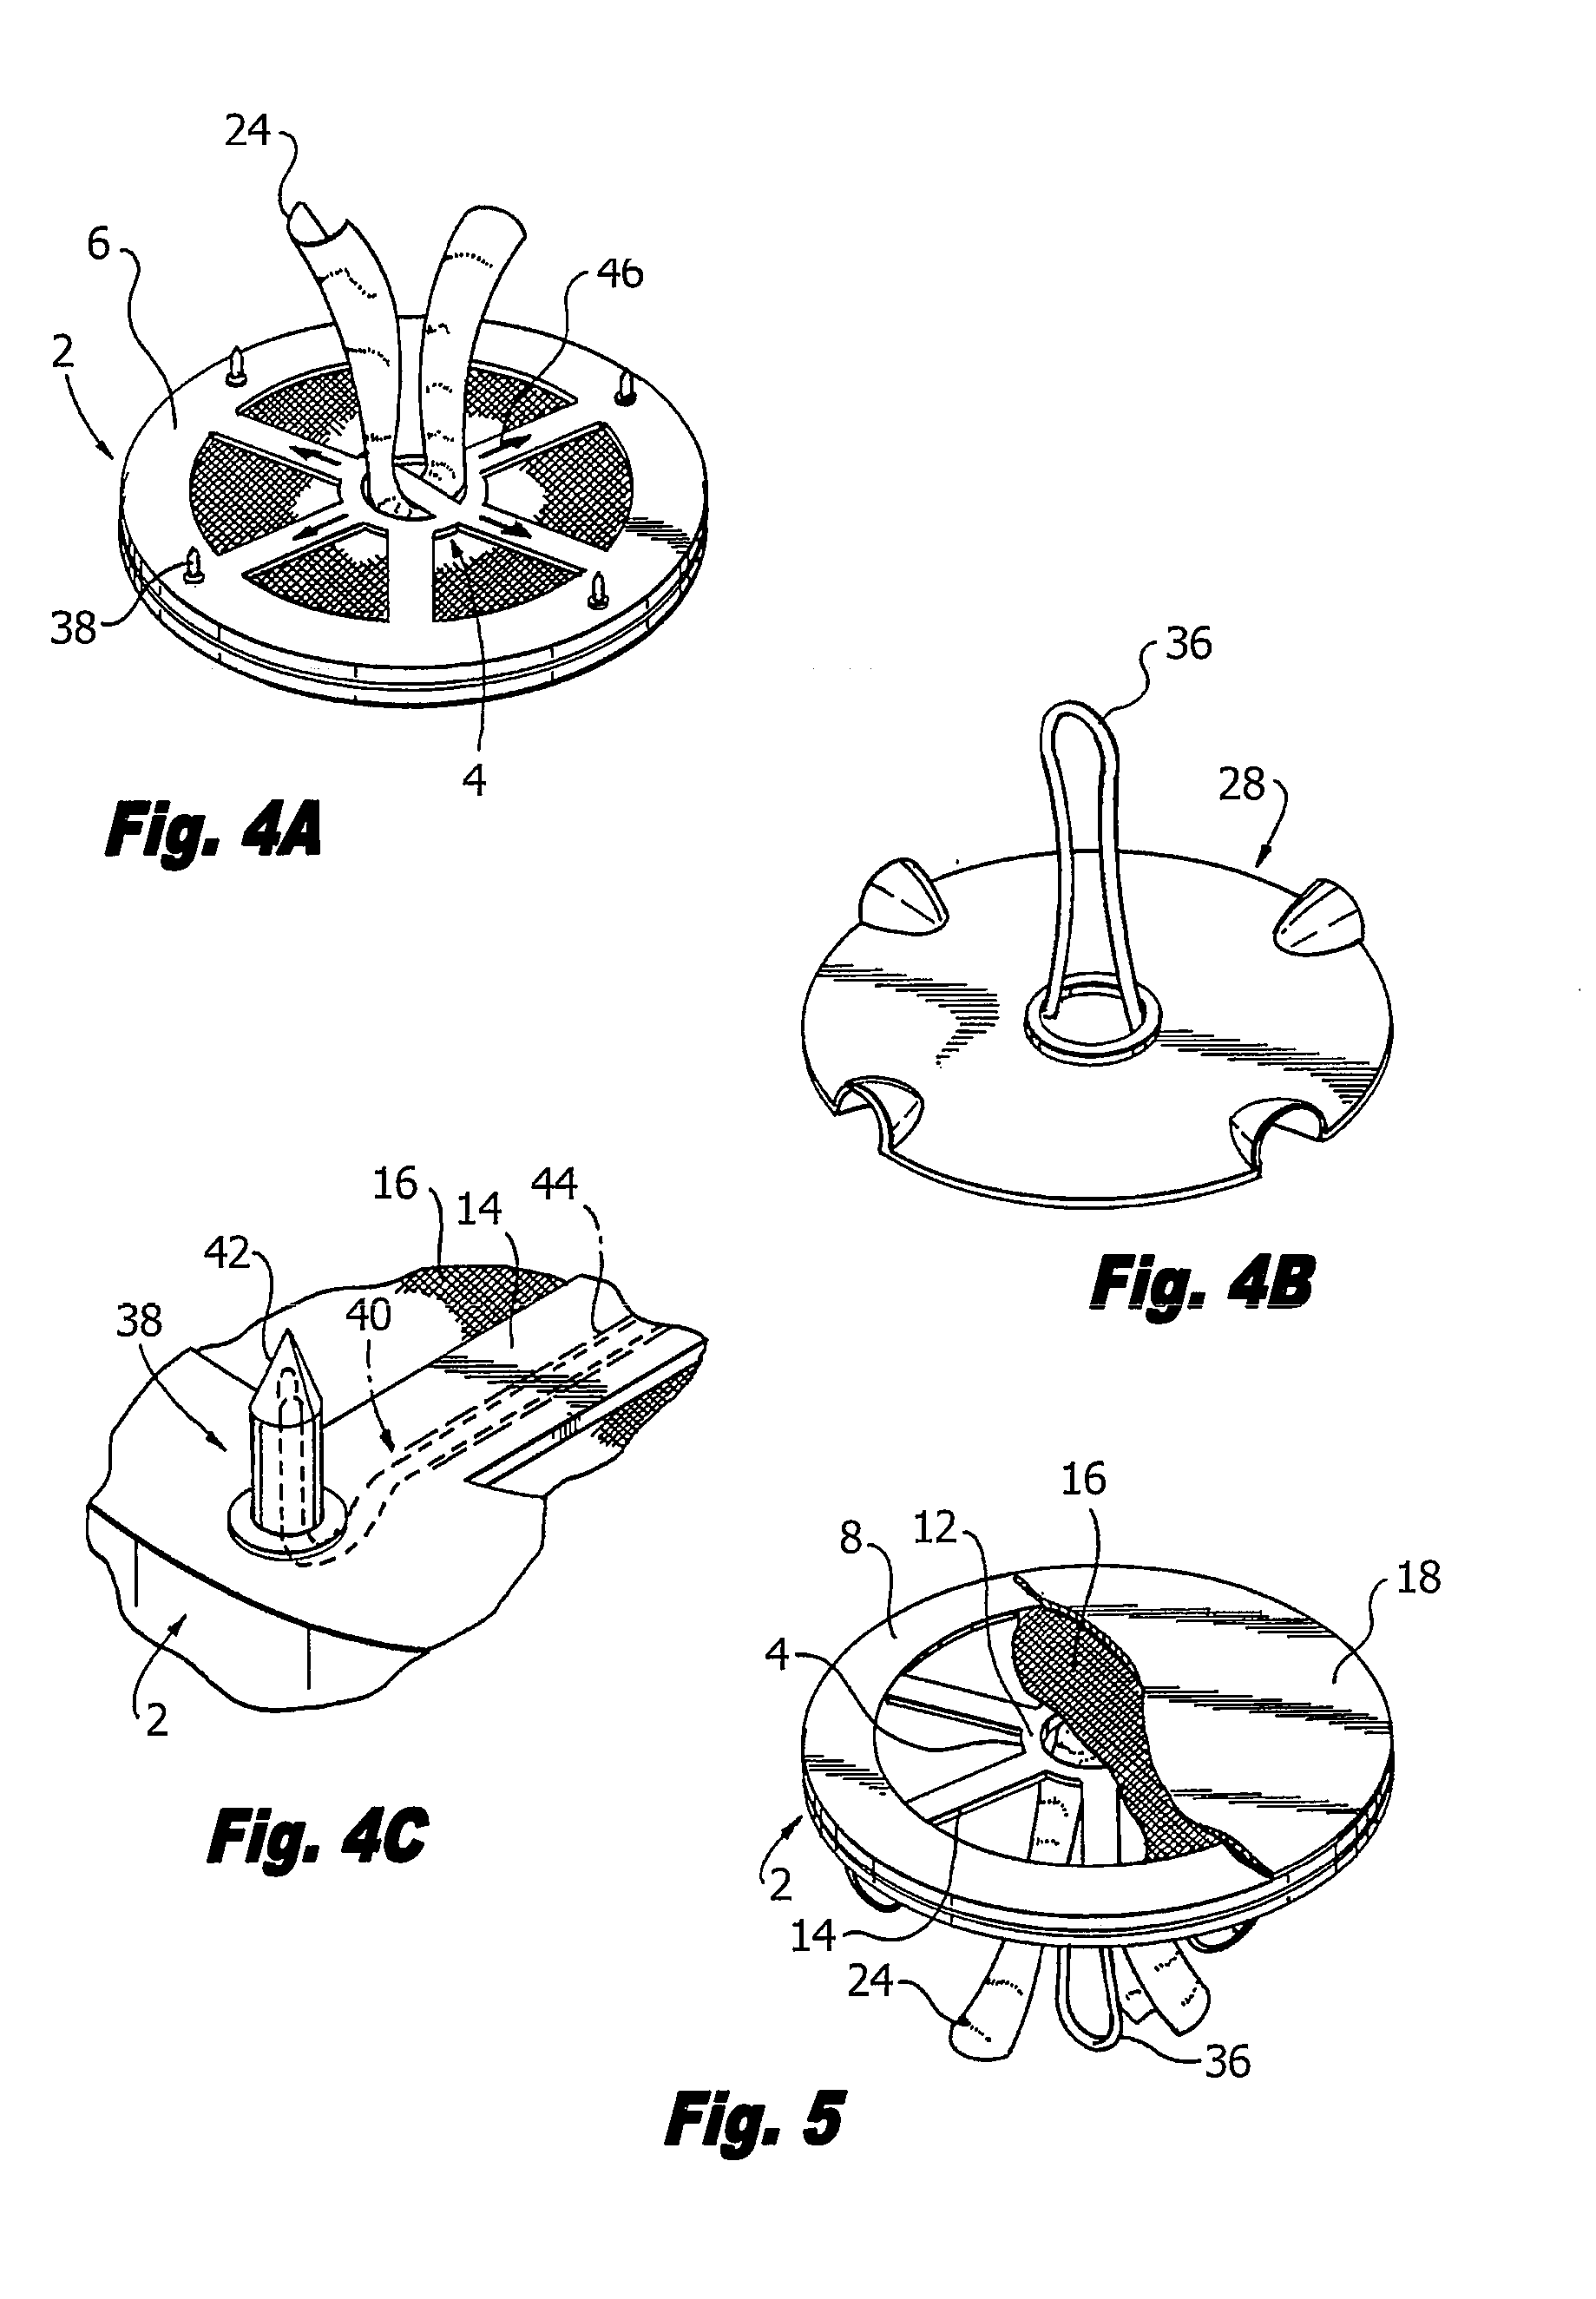 Methods of repairing a hernia using a hernia support device